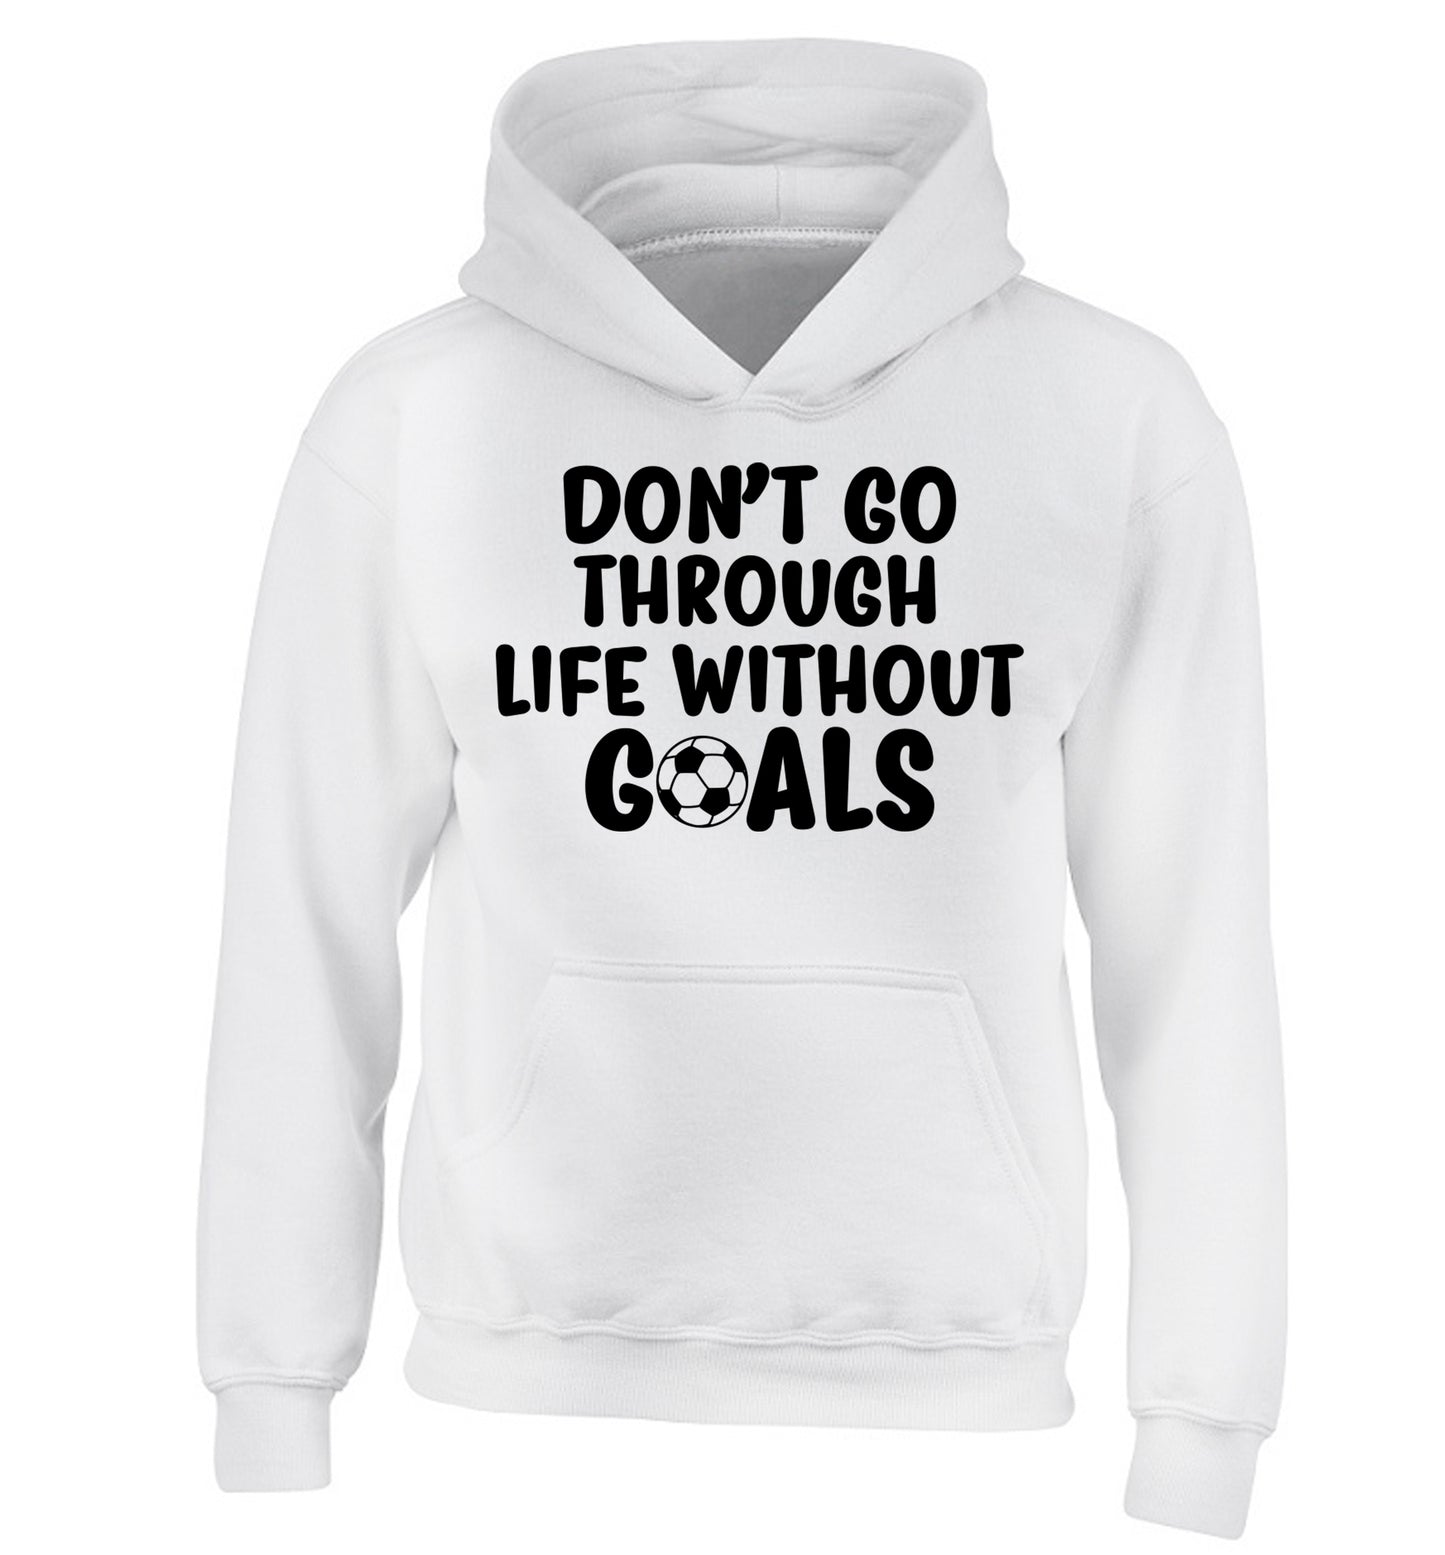 Don't go through life without goals children's white hoodie 12-14 Years